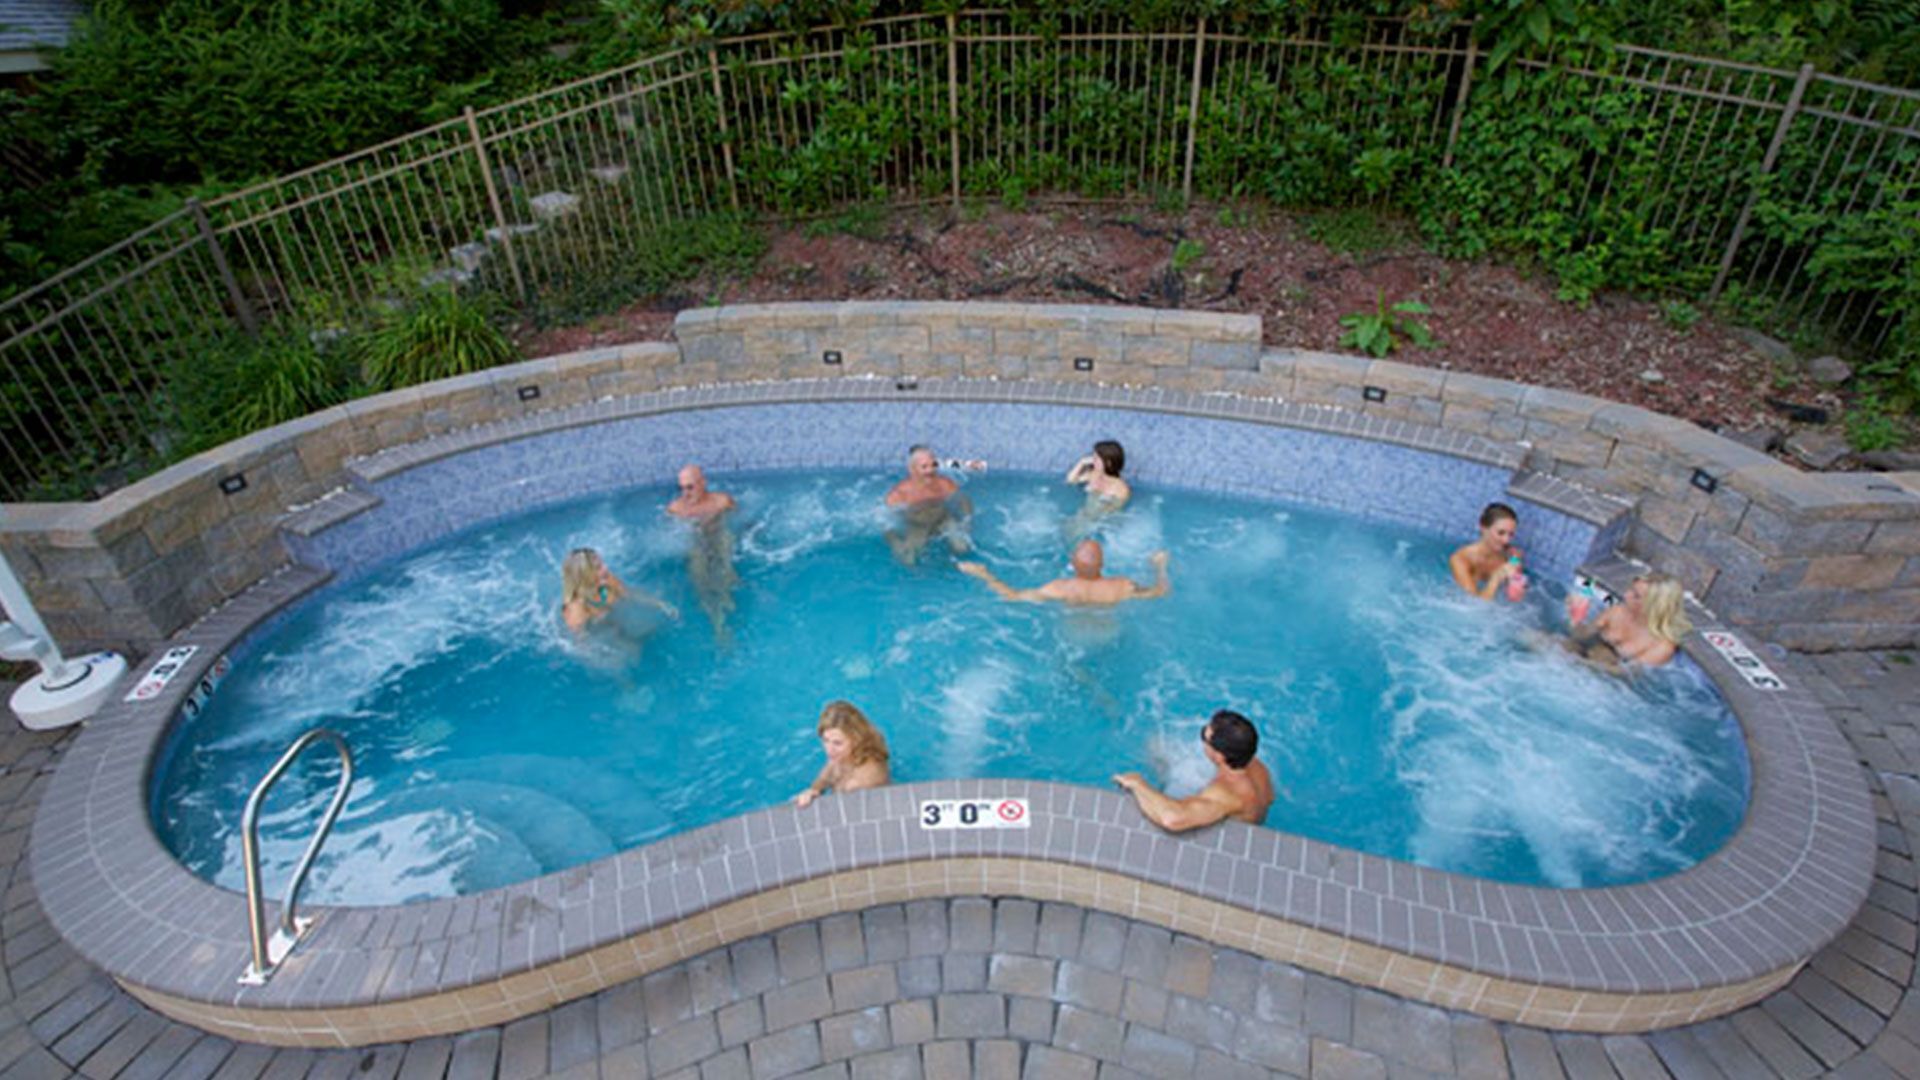 Top best nudist resorts in the US for barrier-free vacations. Stay and body comfort